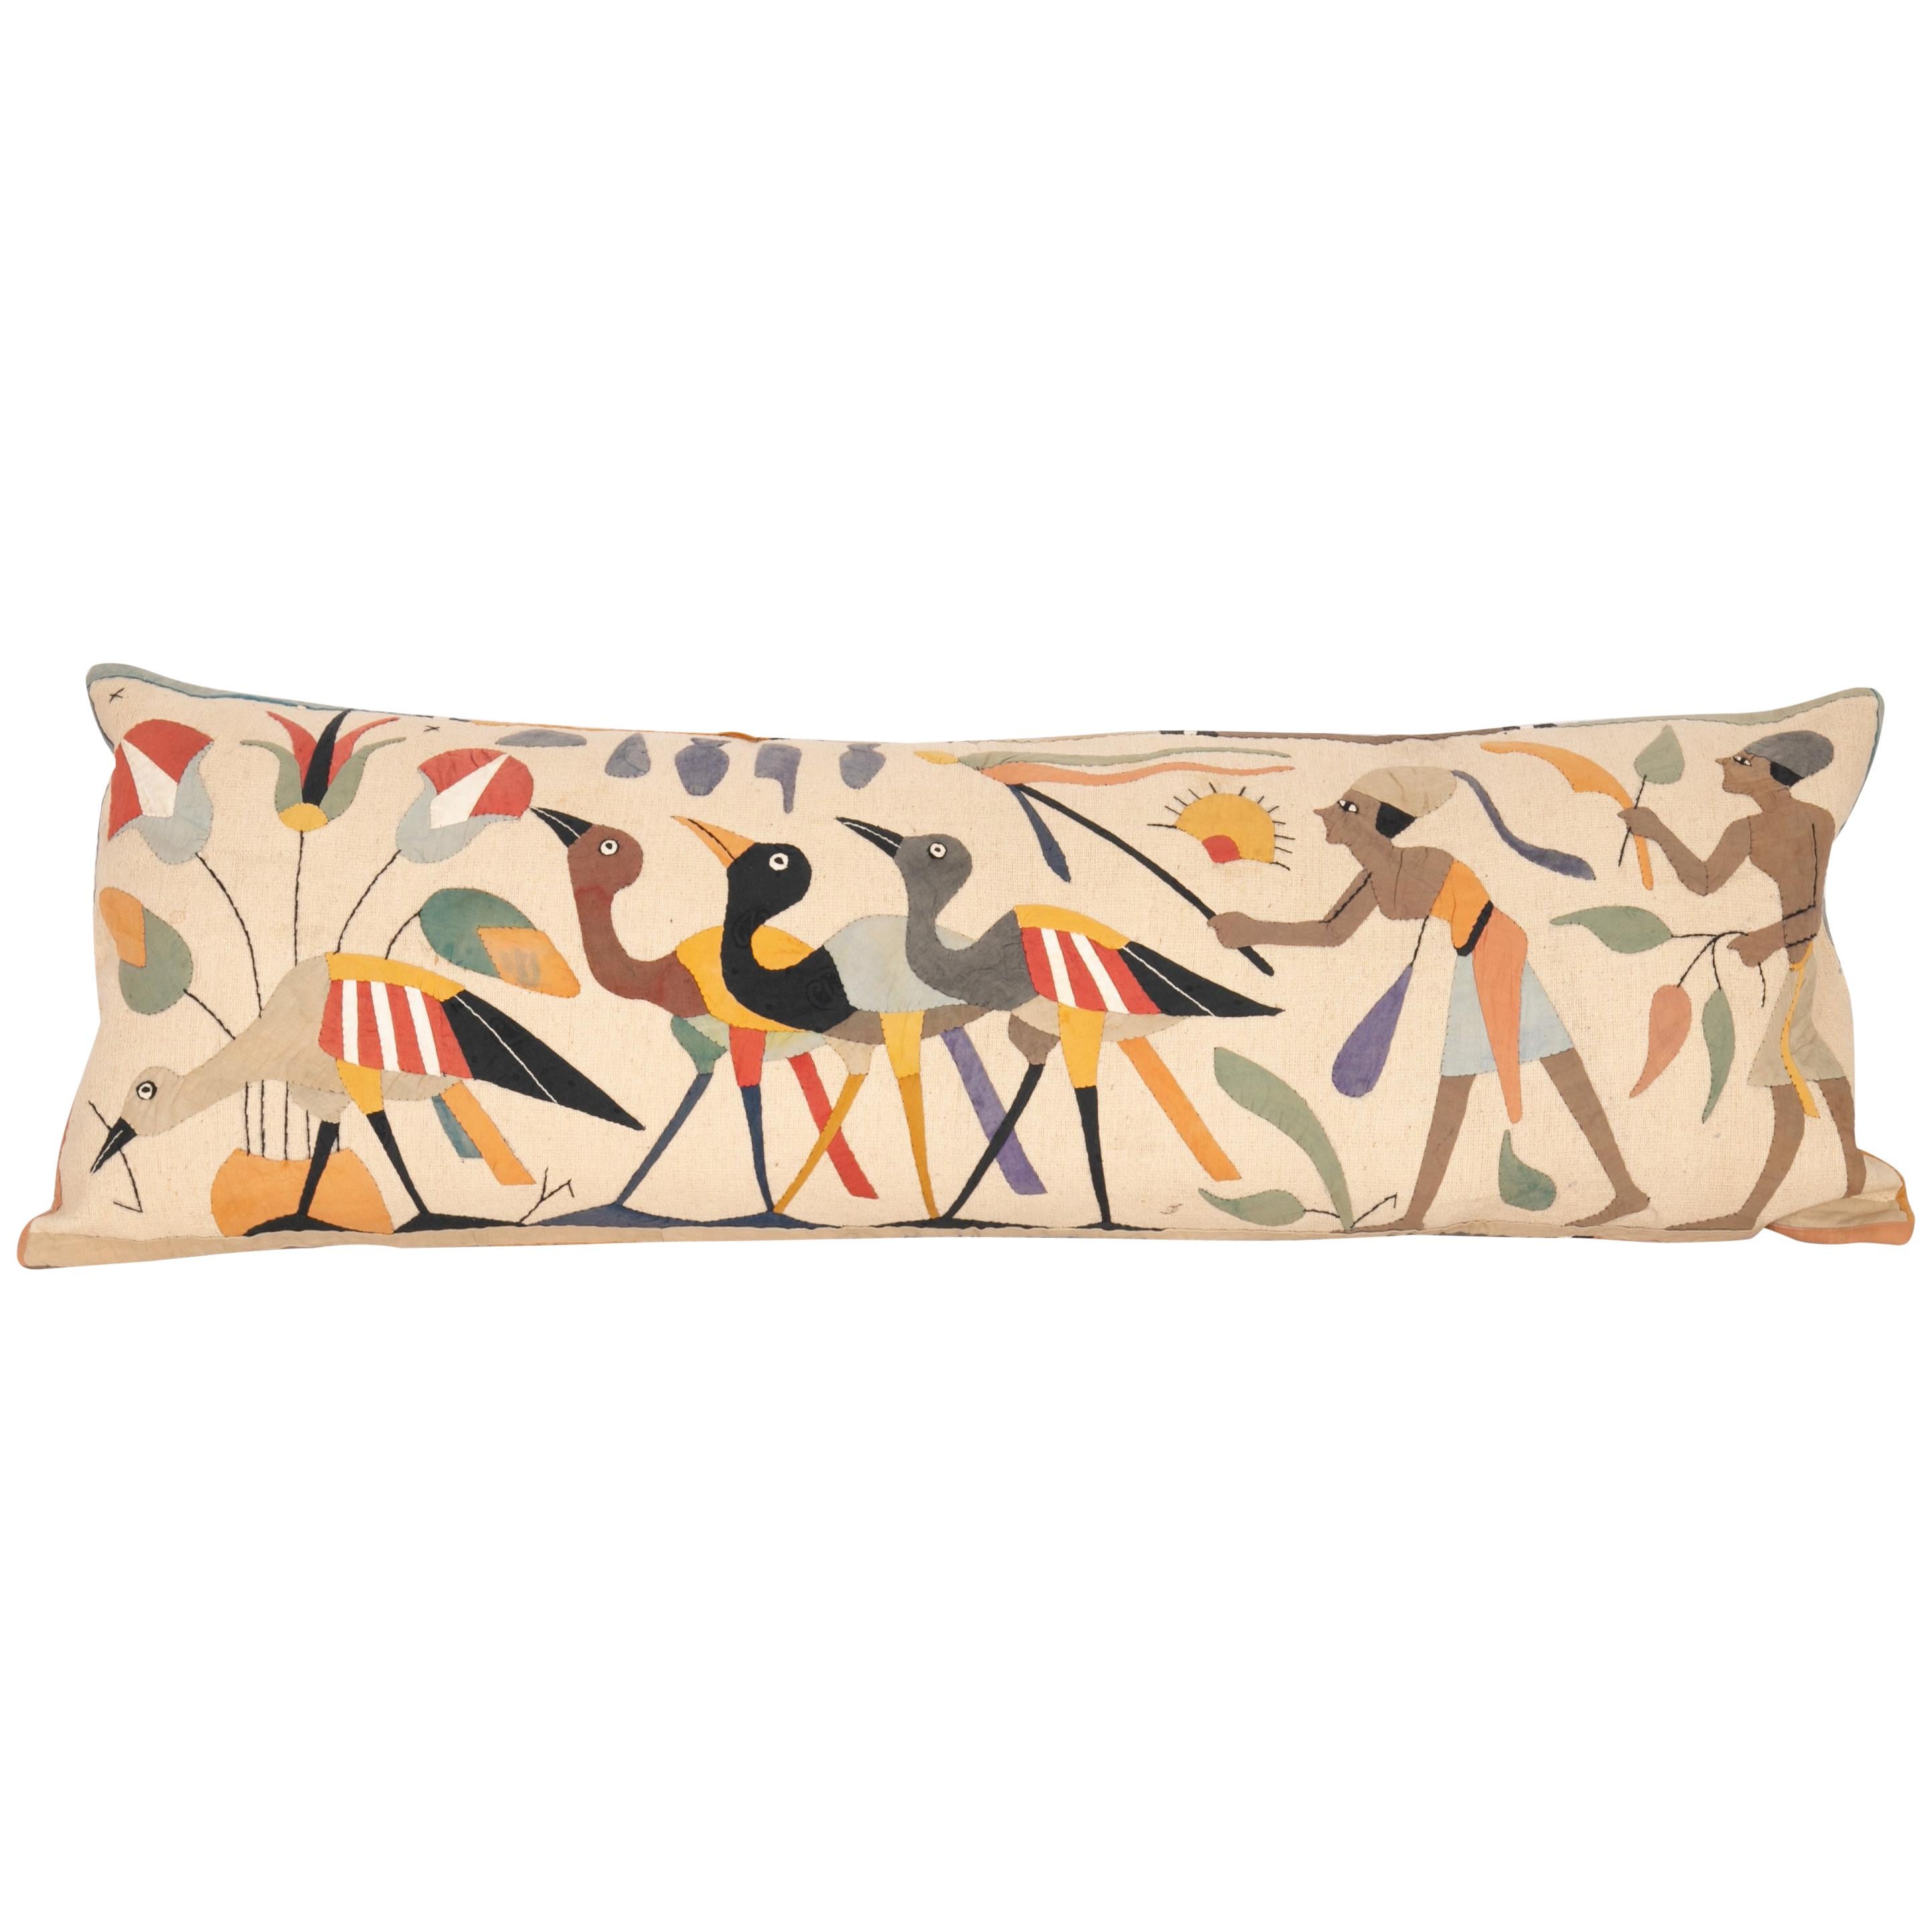 Pillow Case Made from an Egyptian Applique 'Khayamiya' Panel, Late 20th Century